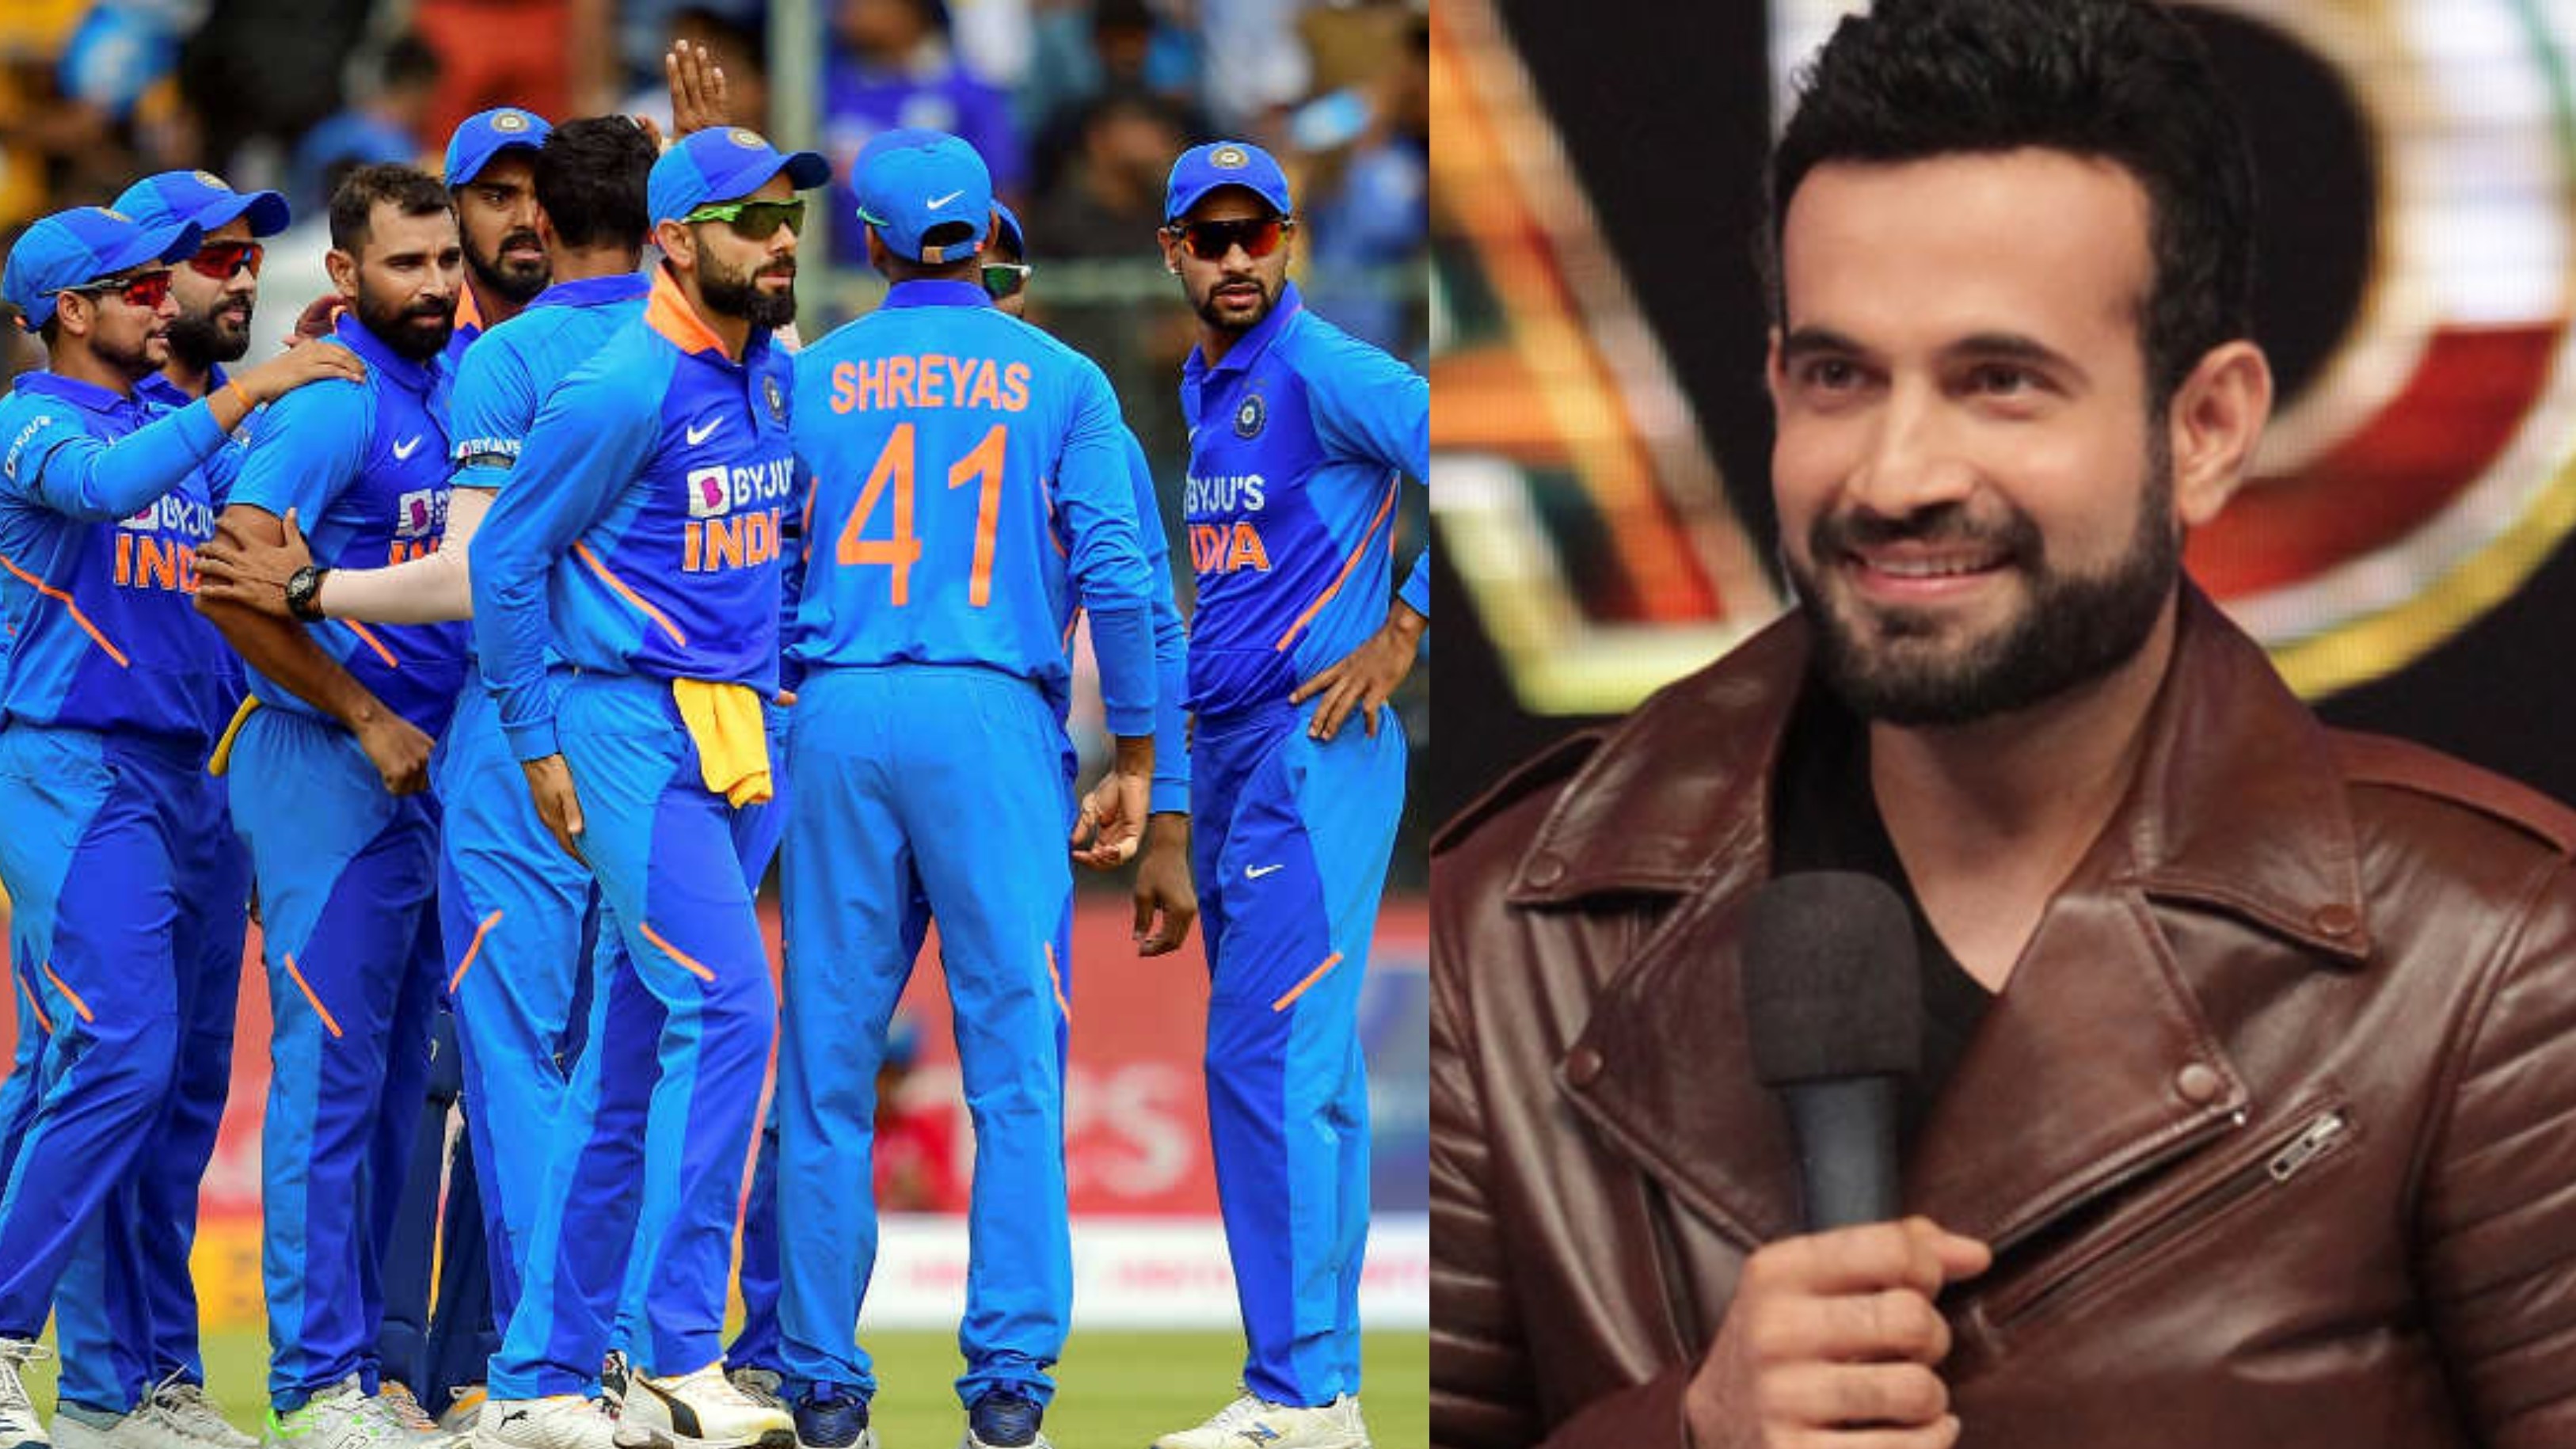 Indian Team requires better planning to conquer ICC tournaments, says Irfan Pathan